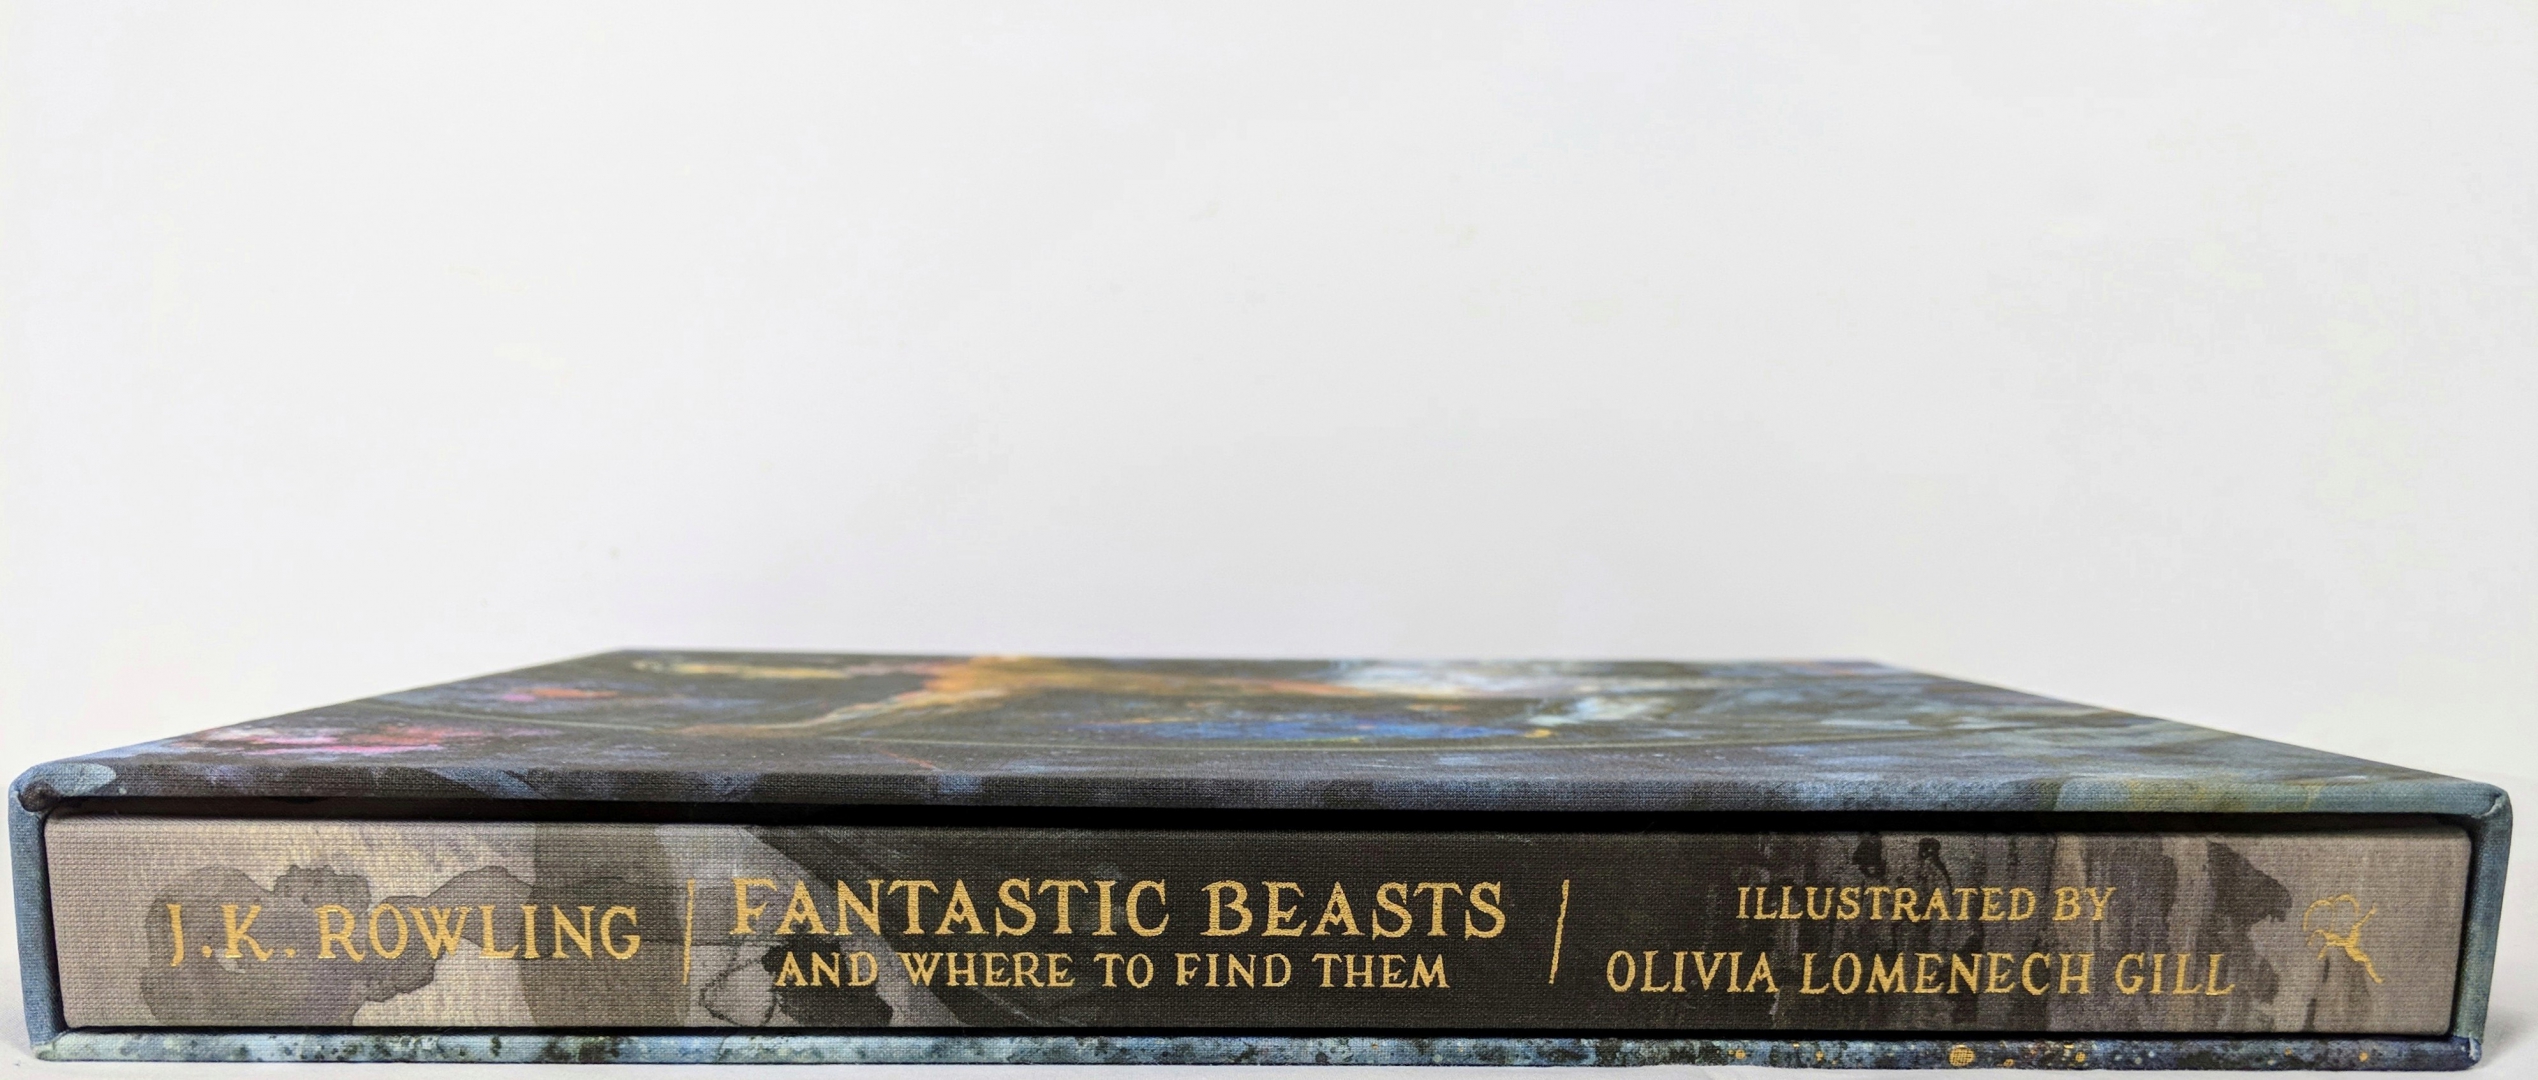 Joanne Rowling: Fantastic Beasts and Where to Find Them